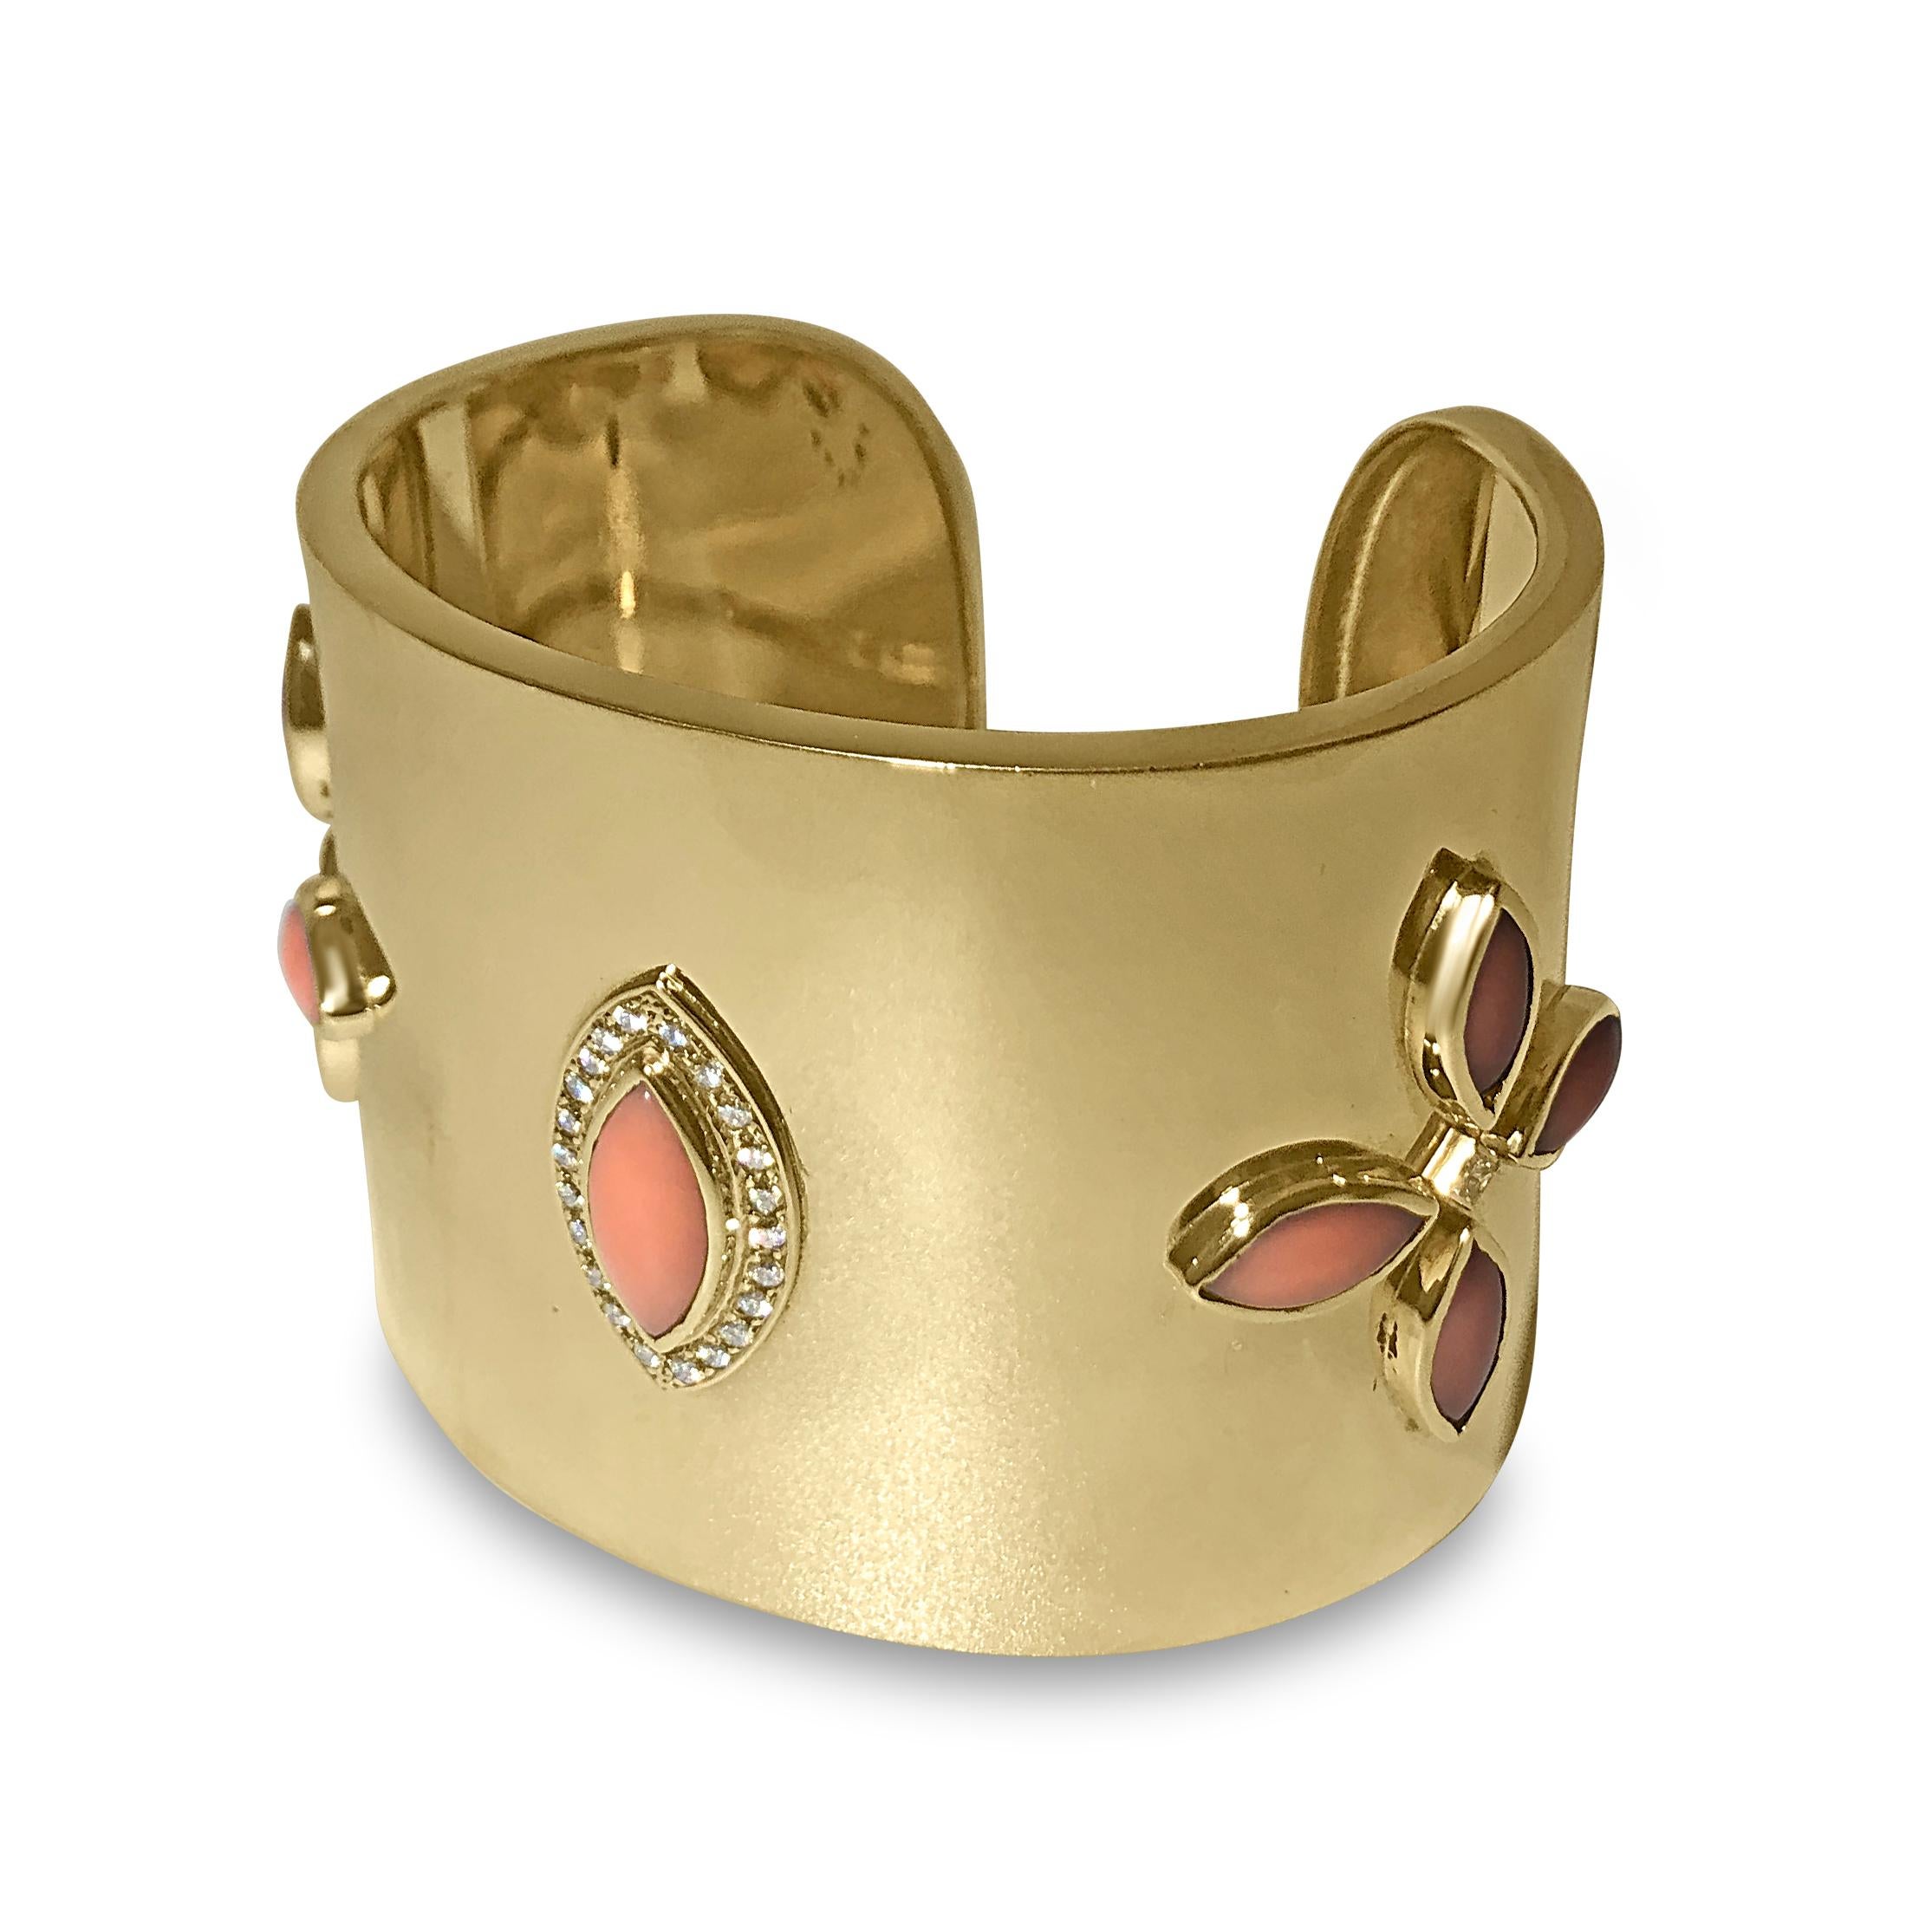 Modern 14K Yellow Gold Cuff with 24 Round Diamonds 0.60ct and Coral Cabachons by Manart For Sale